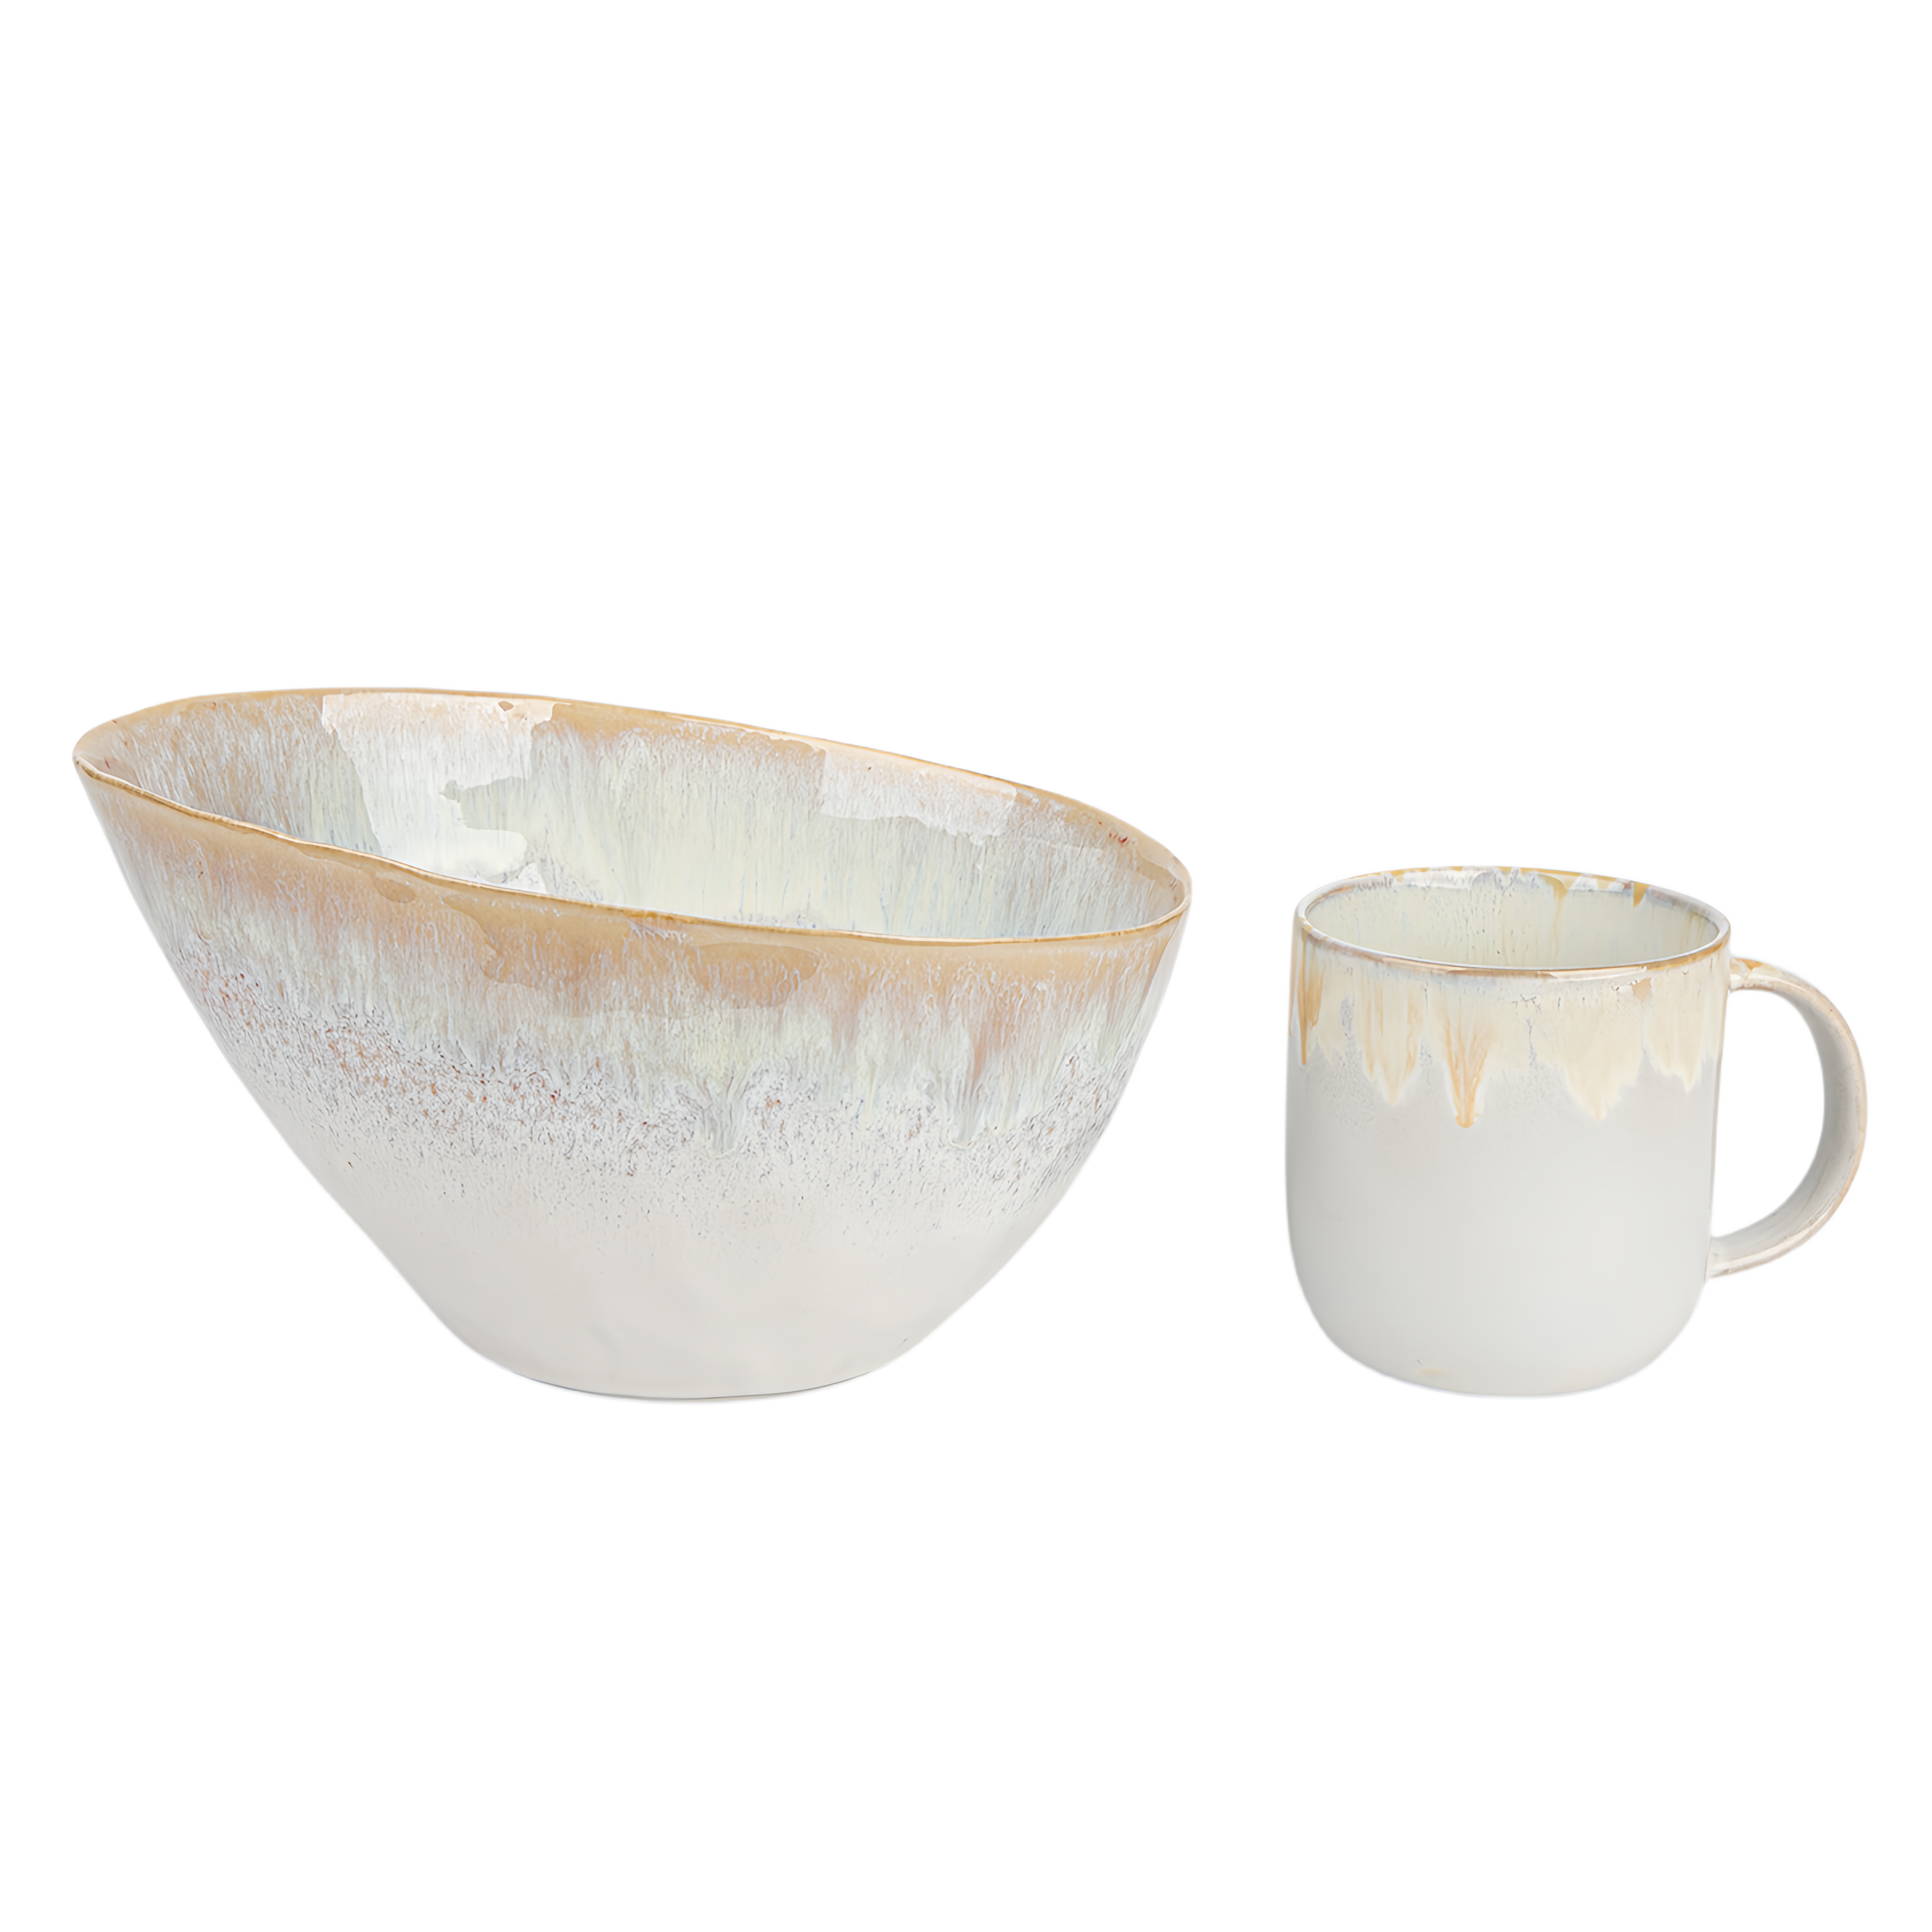 qinge Slanted Mouth Ceramic Bowl and Cup Set of Two